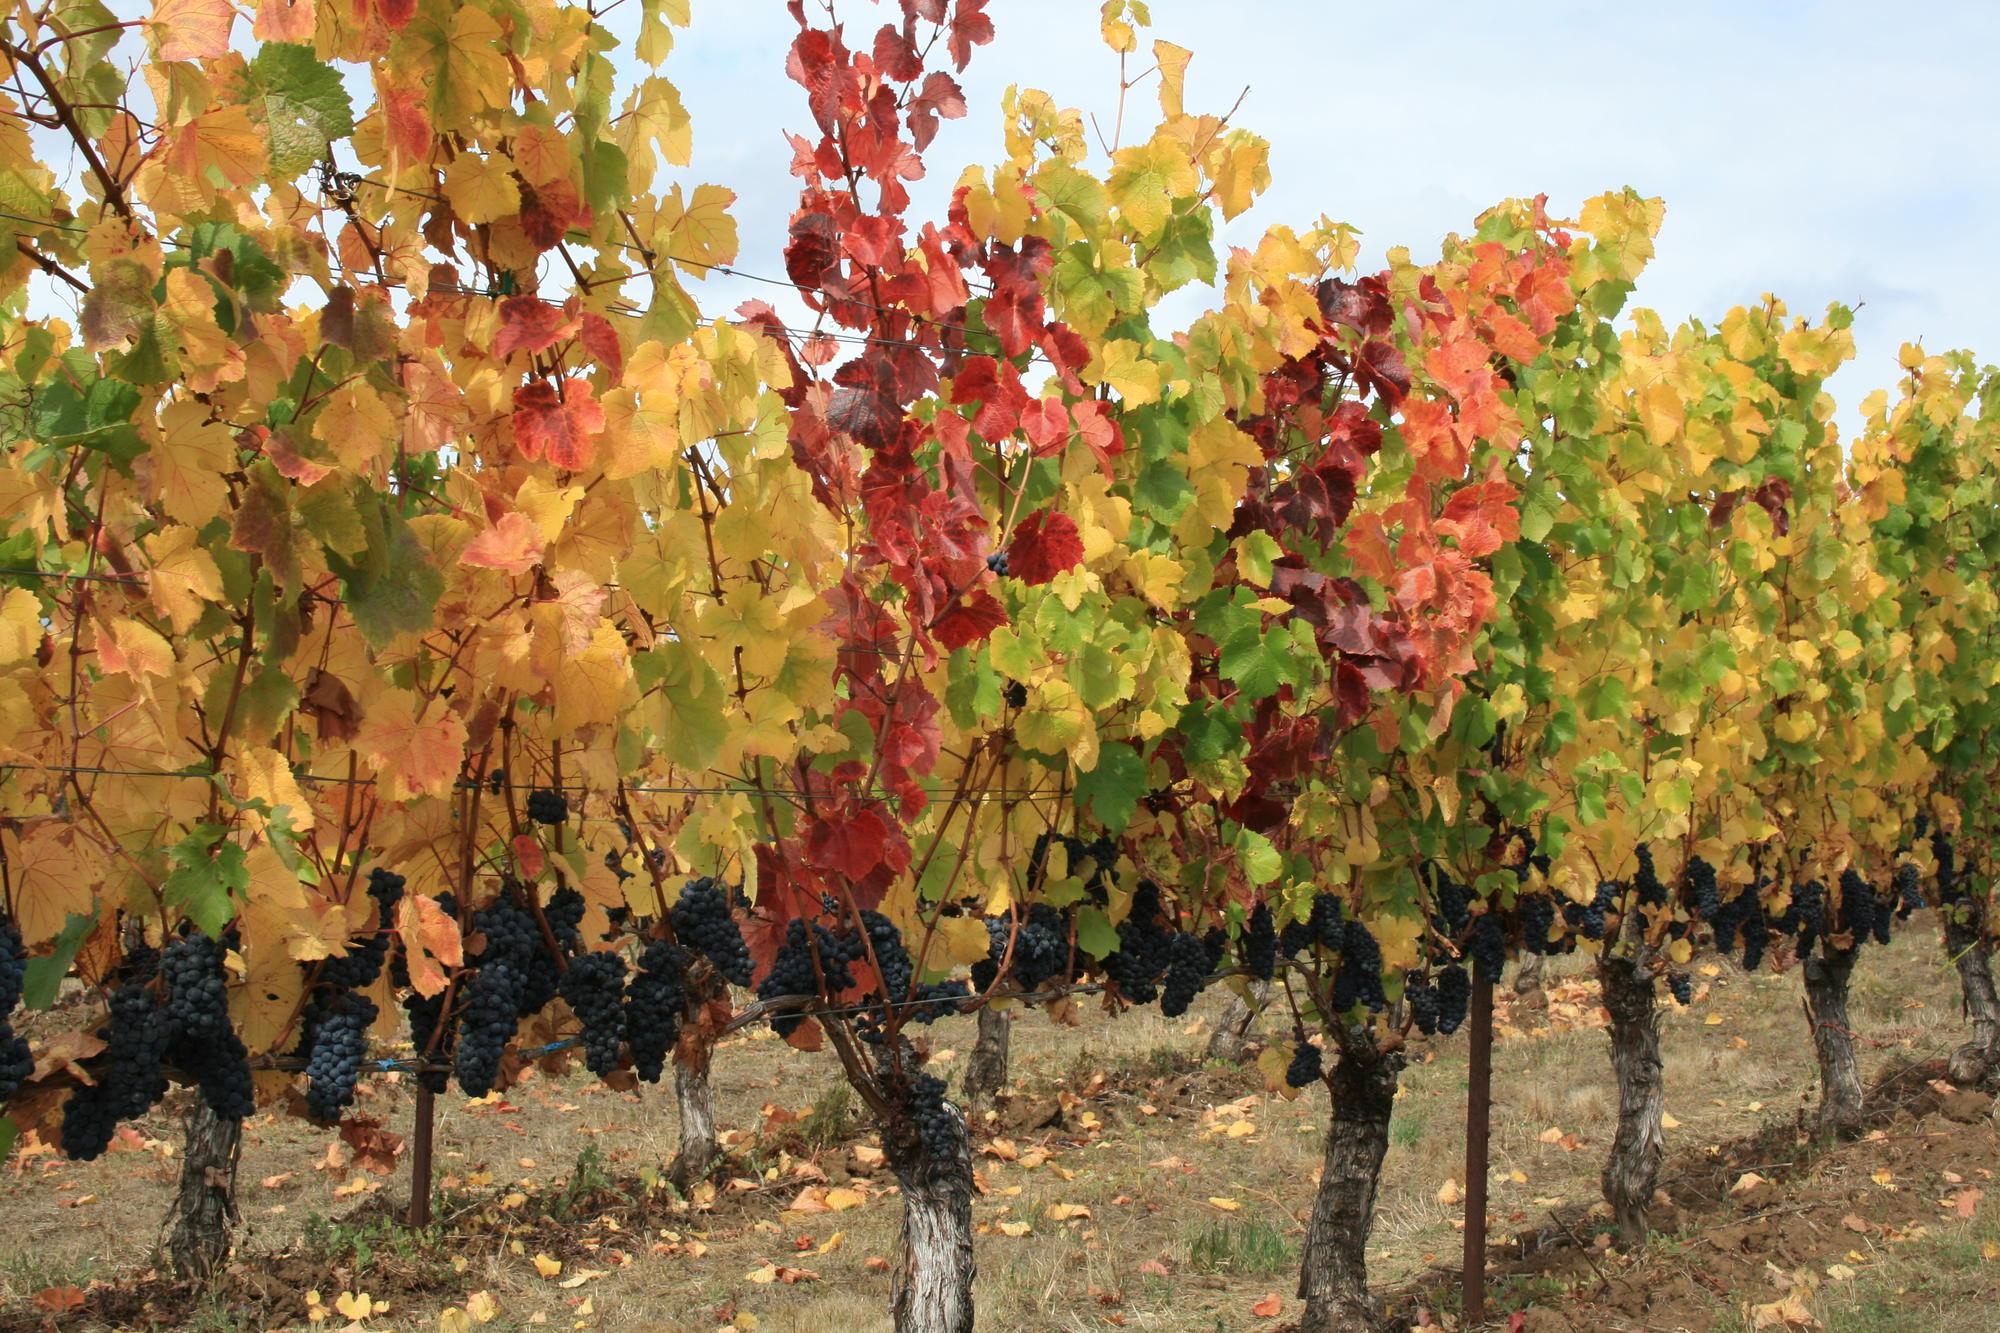 A grapevine's red leaves interspersed amid green and yellow leaves indicate the presence of red blotch disease.